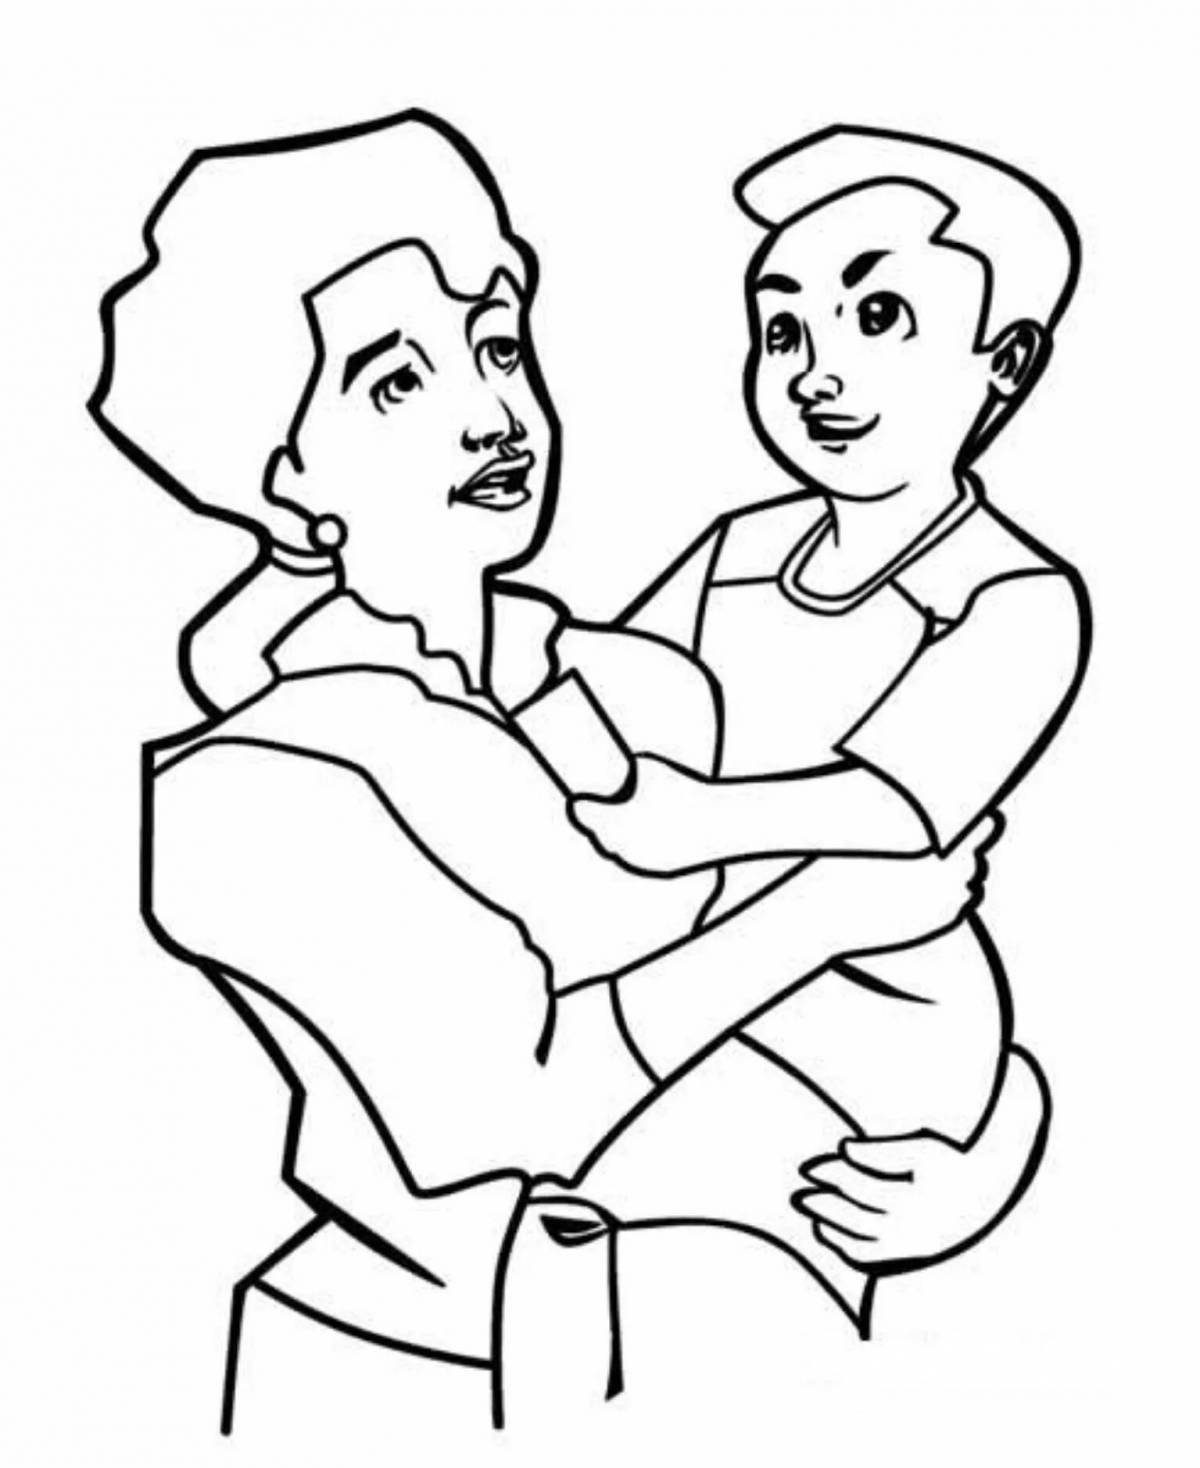 Coloring page luminous son and mother